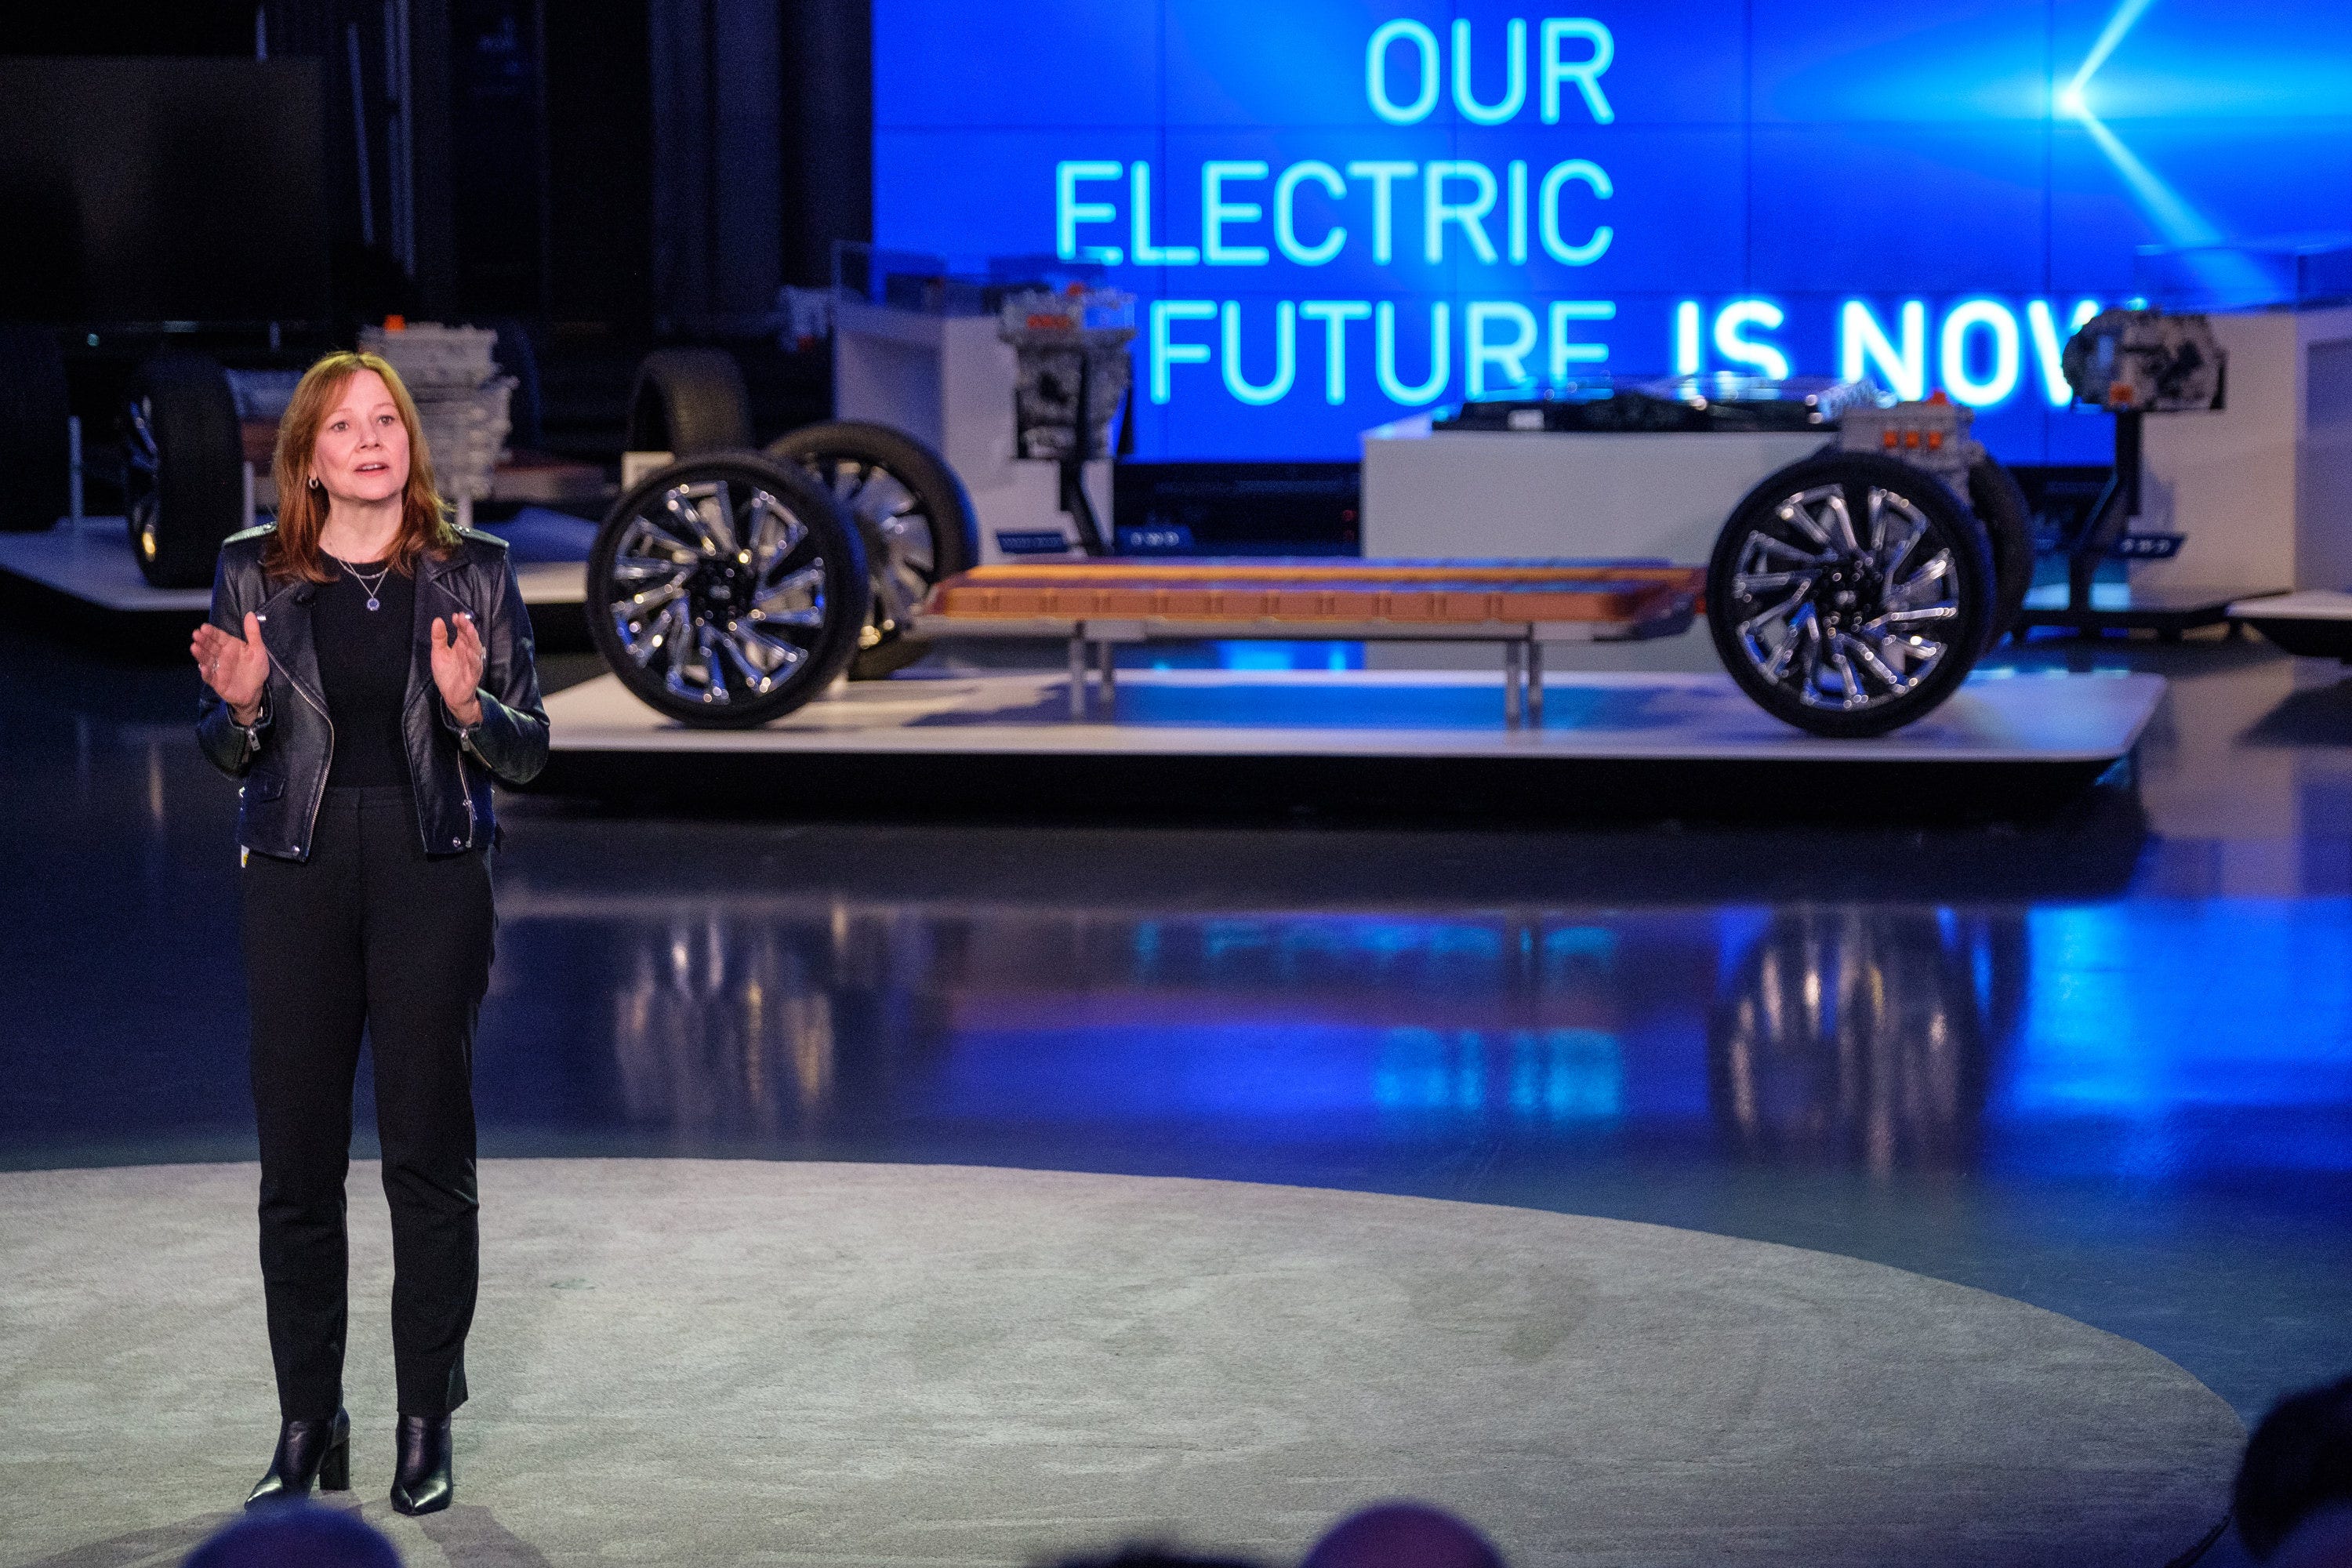 General Motors Chairman and CEO Mary Barra addresses the gathering Wednesday, March 4, 2020 at an event detailing GM’s electric vehicle technologies and upcoming products in the Design Dome on the GM Tech Center campus in Warren, Michigan. (Photo by Steve Fecht for General Motors)